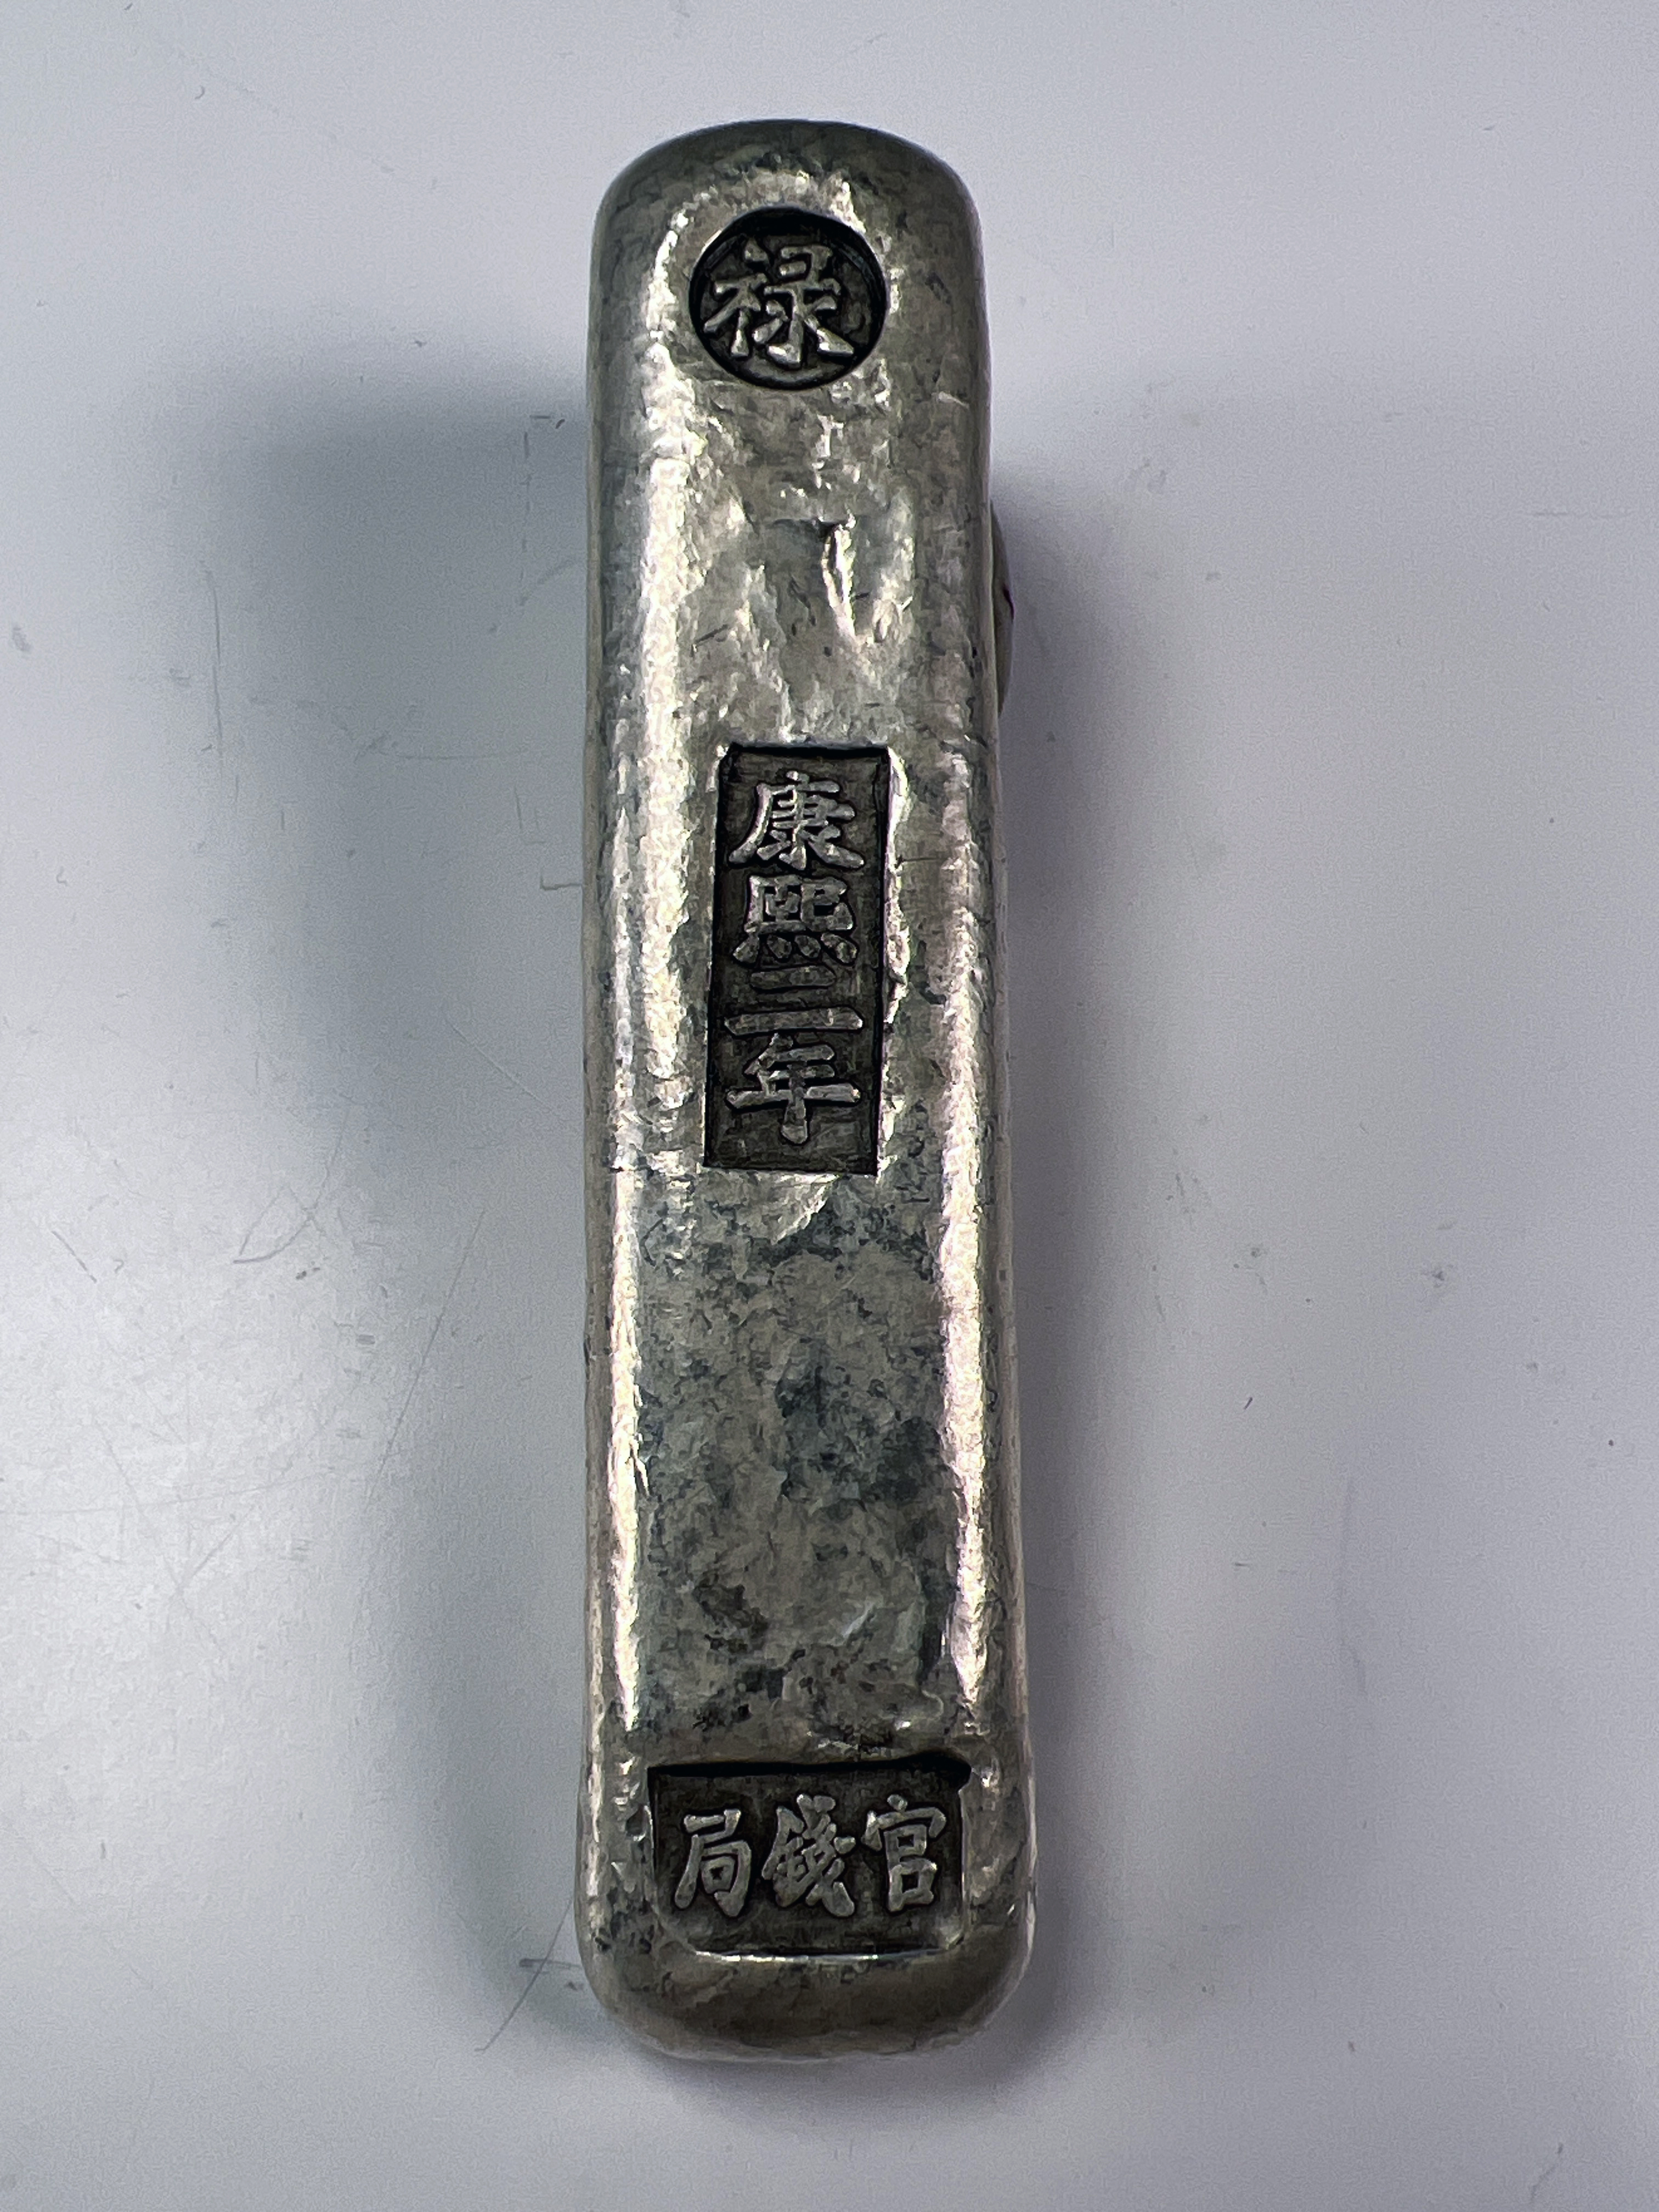 Exquisite Chinese Silver Character Ingot - A Touch Of History image 1